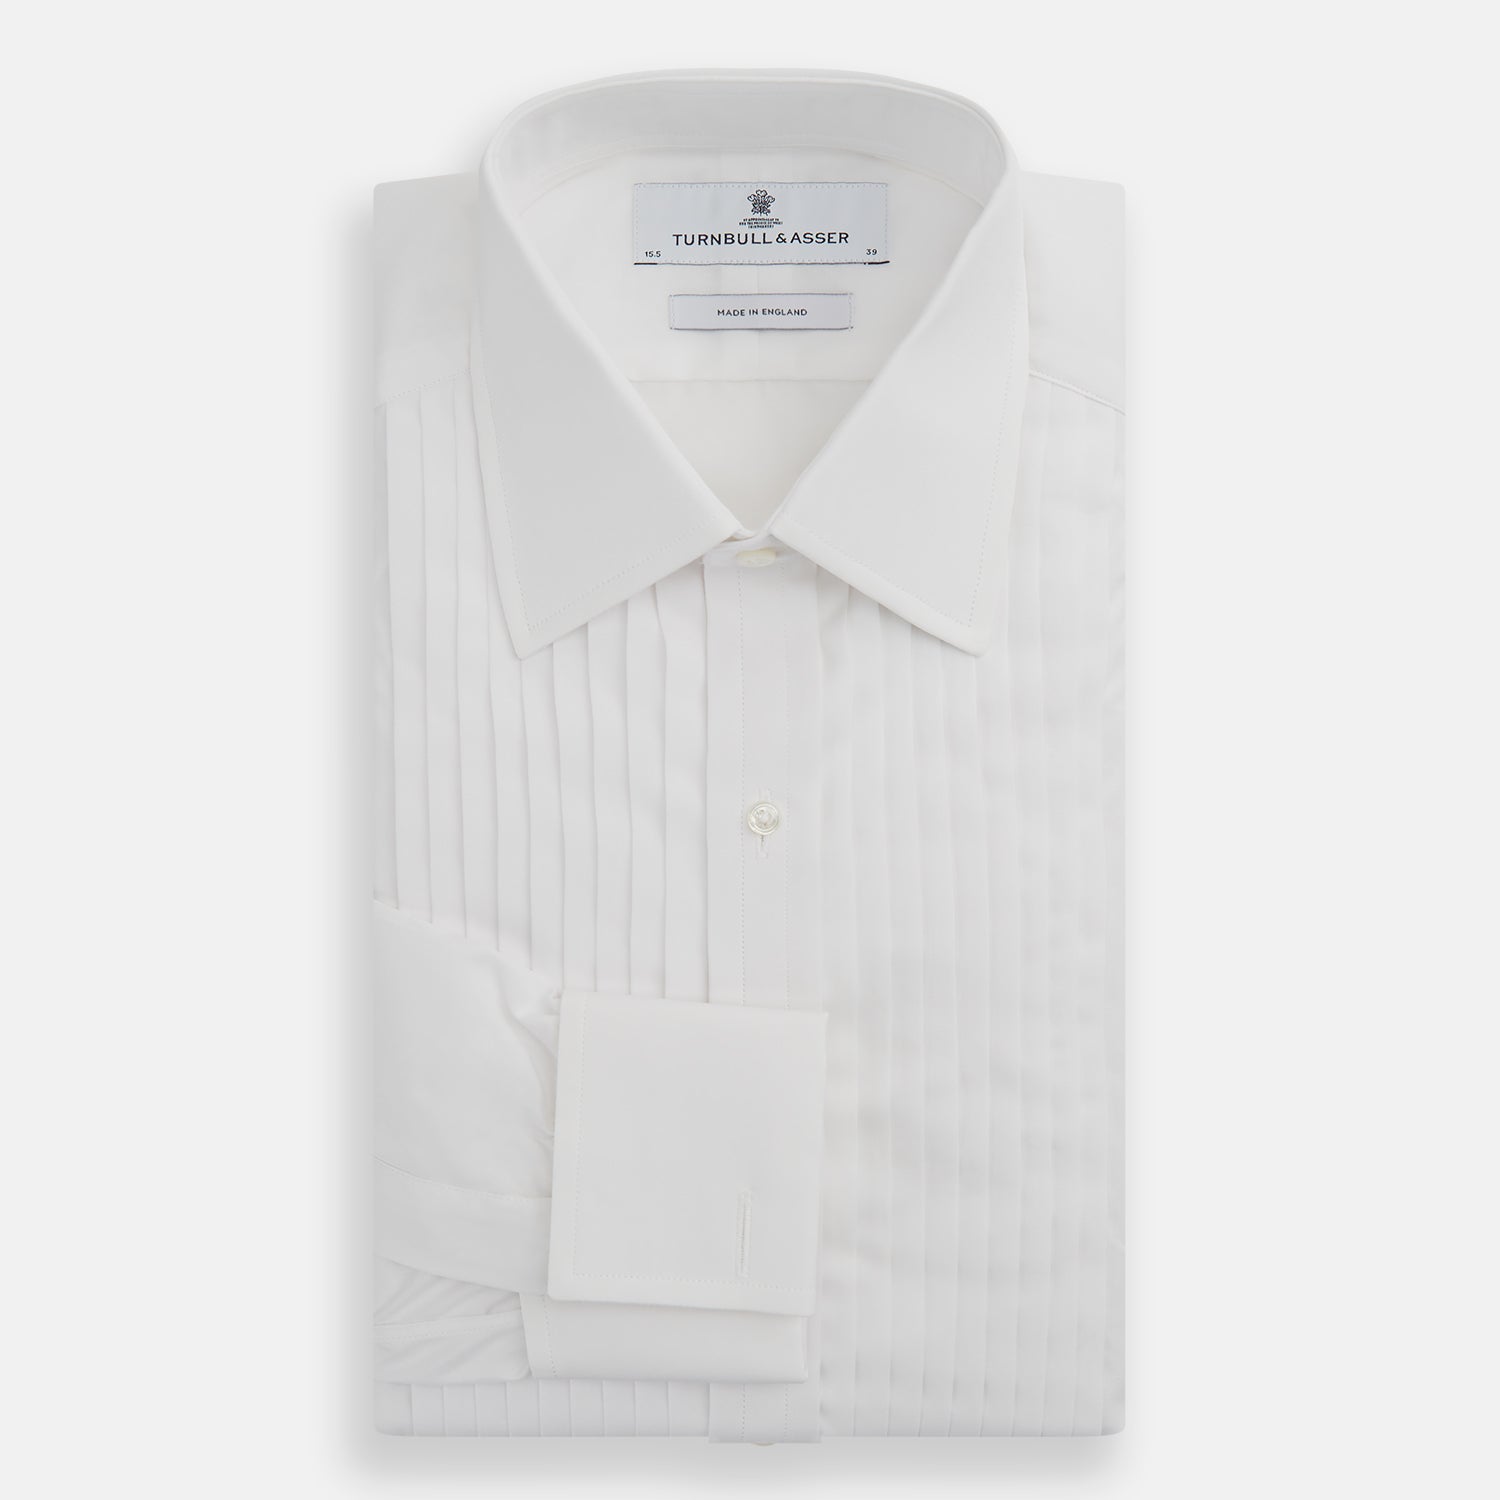 White Pleated Cotton Dress Shirt with T&A Collar and Double Cuffs